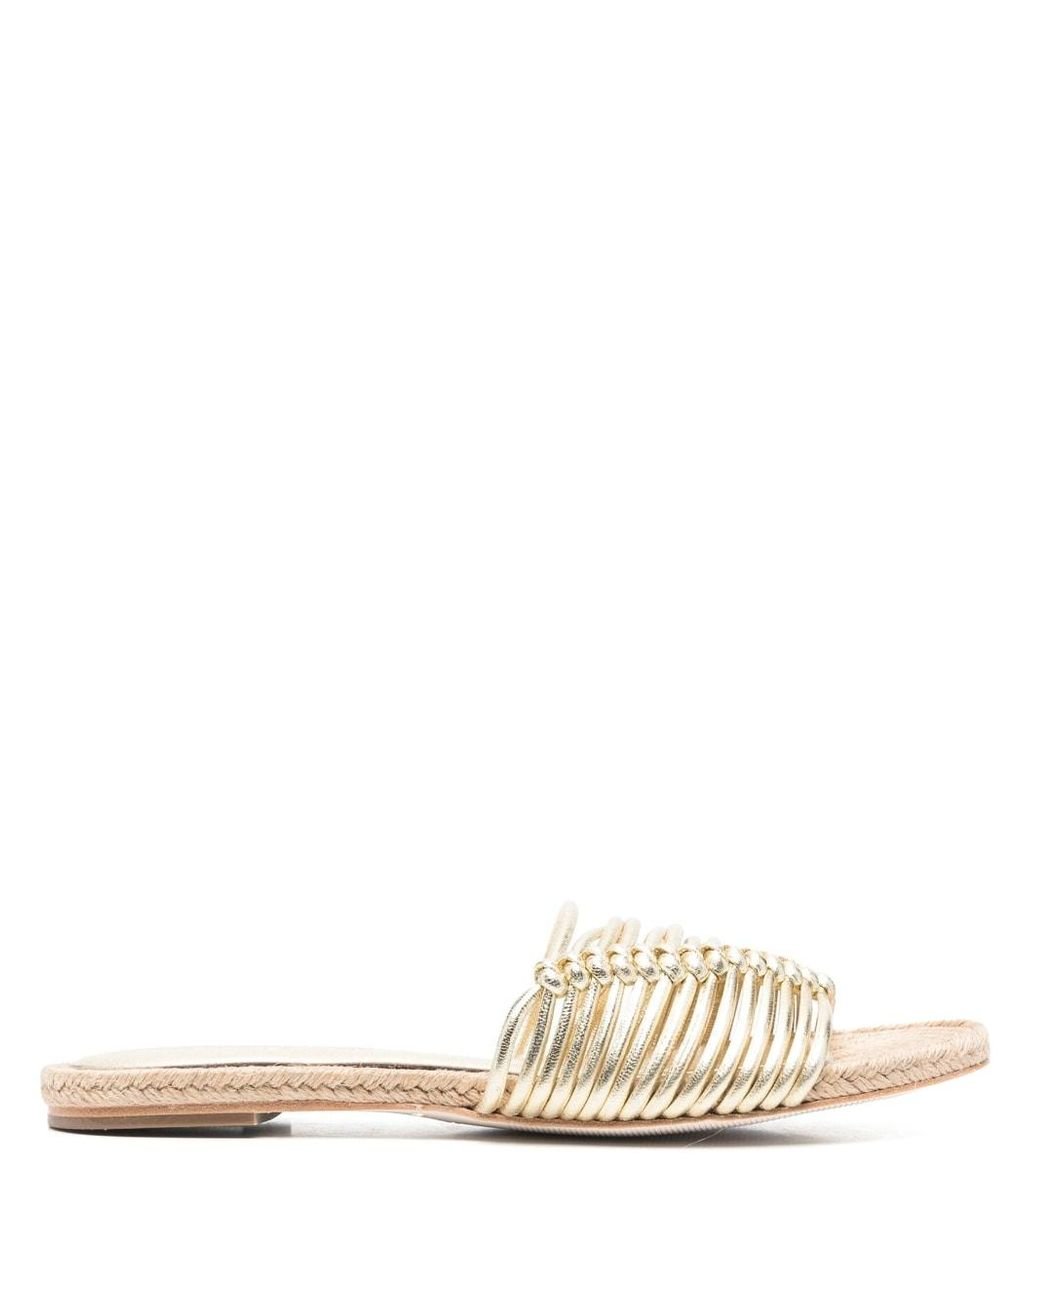 Paloma Barceló Interwoven Leather Slides in Natural | Lyst